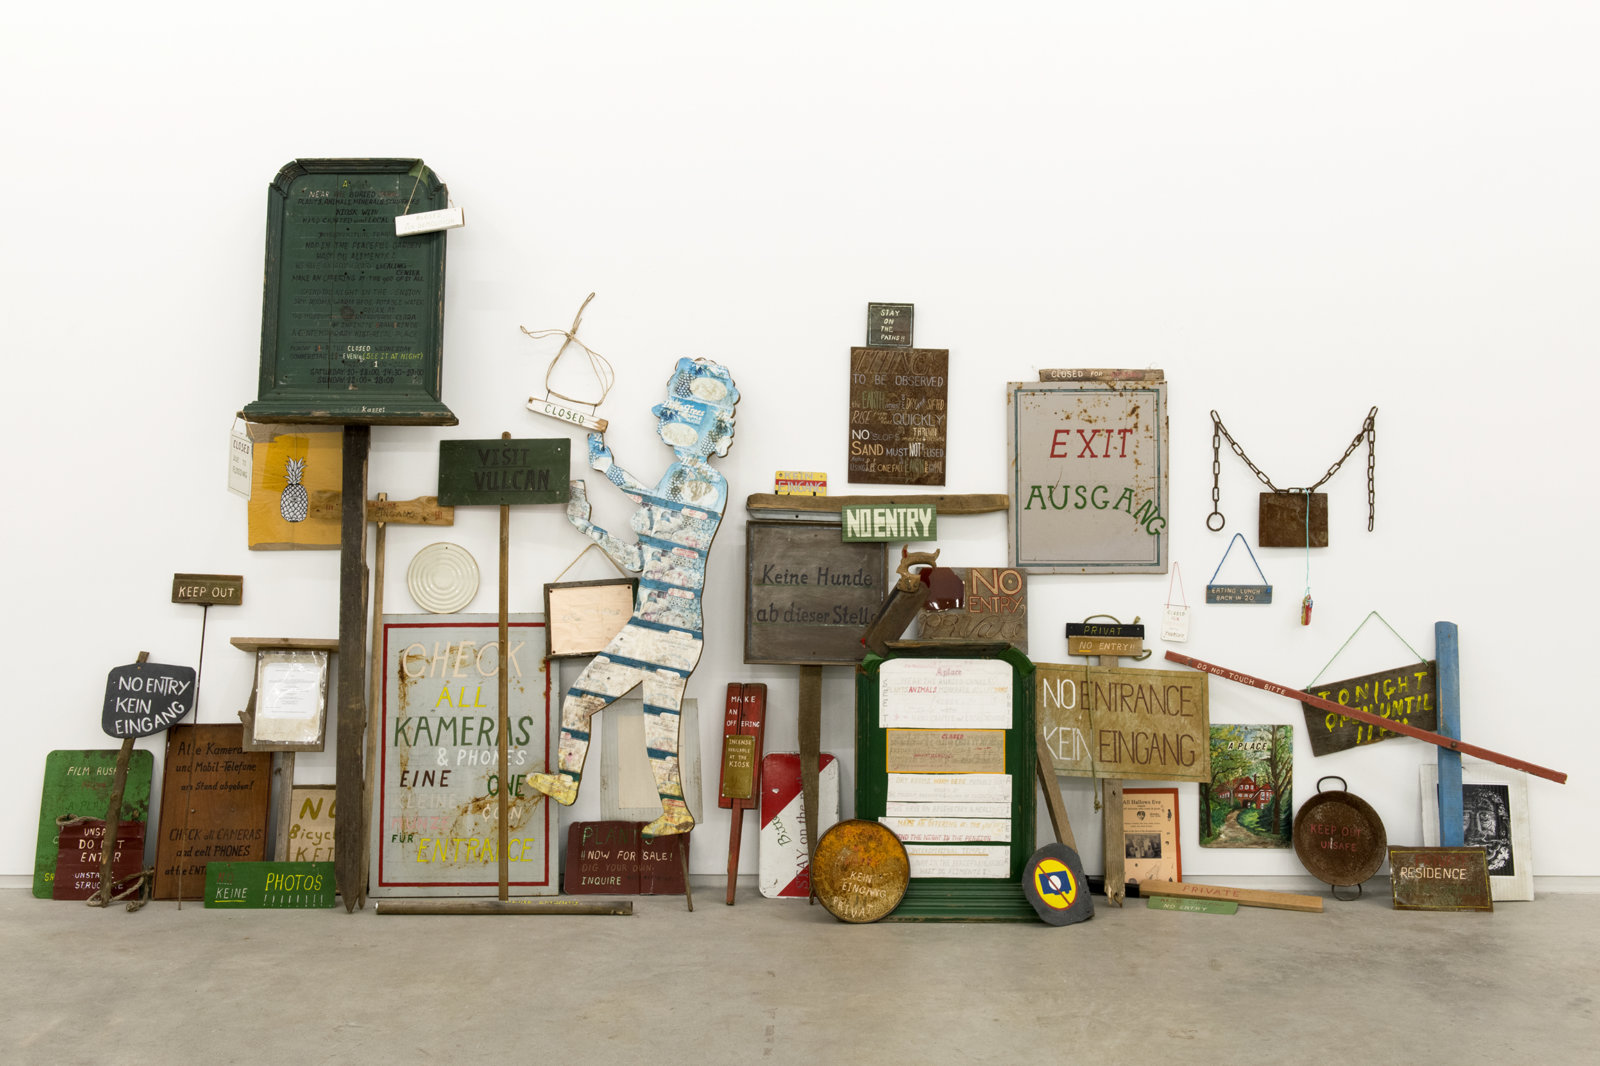 Ashes Withyman, Signs from a place, near the buried canal, 2011–2012, 50 sign works, wood, steel, rope, stone, paper, acrylic and enamel paint, felt marker, 93 x 166 x 17 in. (236 x 422 x 42 cm)